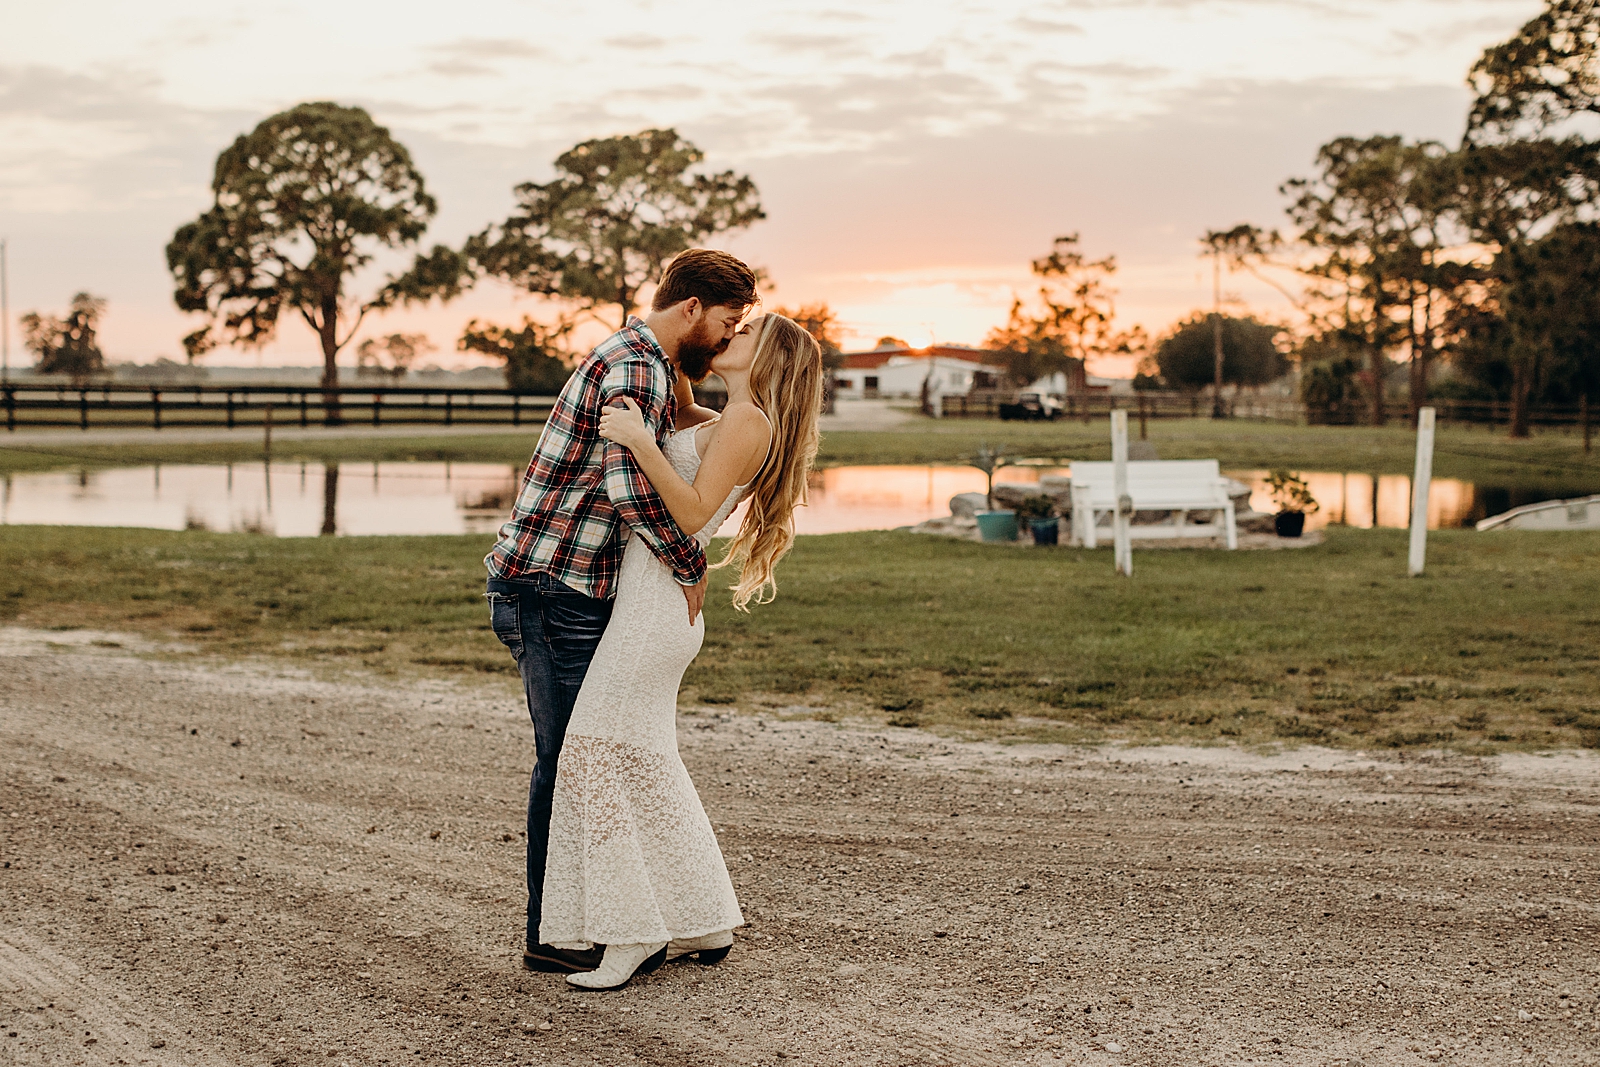 Couple holding each other close and kissing on dirt road on farm with the sunset behind them